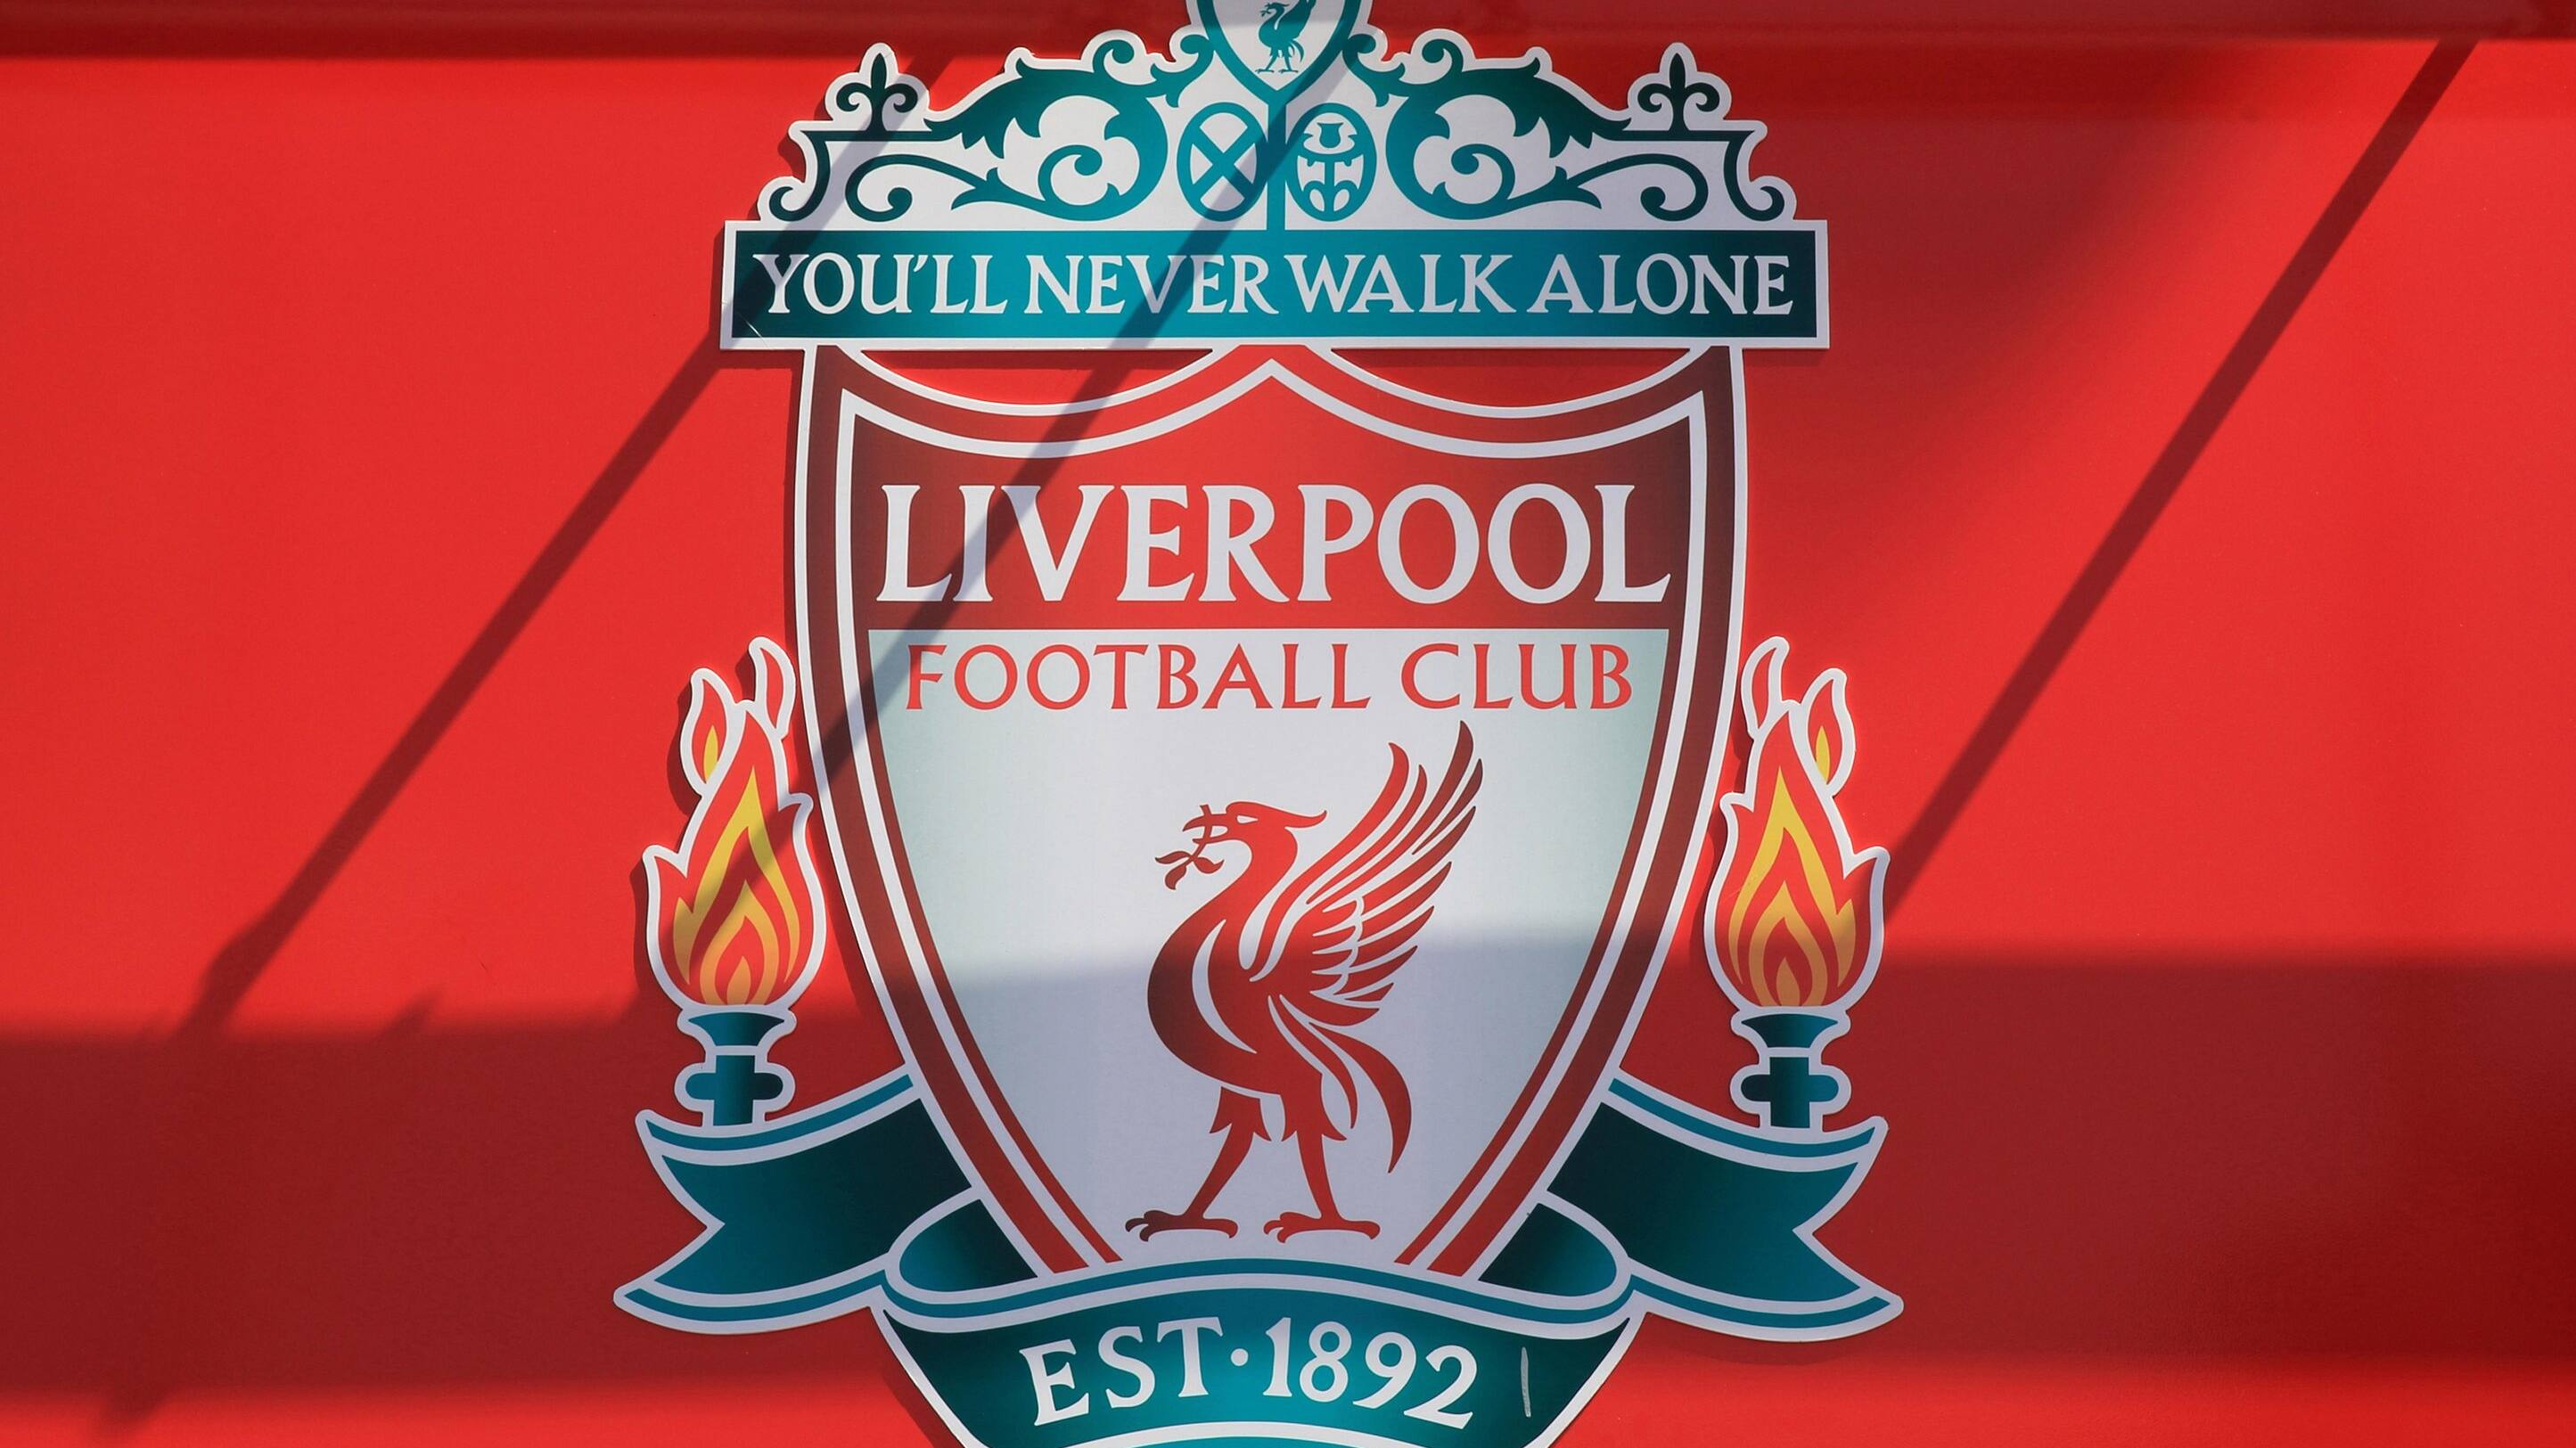 The Liverpool football club emblem, You'll Never Walk Alone, at Anfield football stadium, Merseyside, NW England, UK - Image ID: E4CHEN